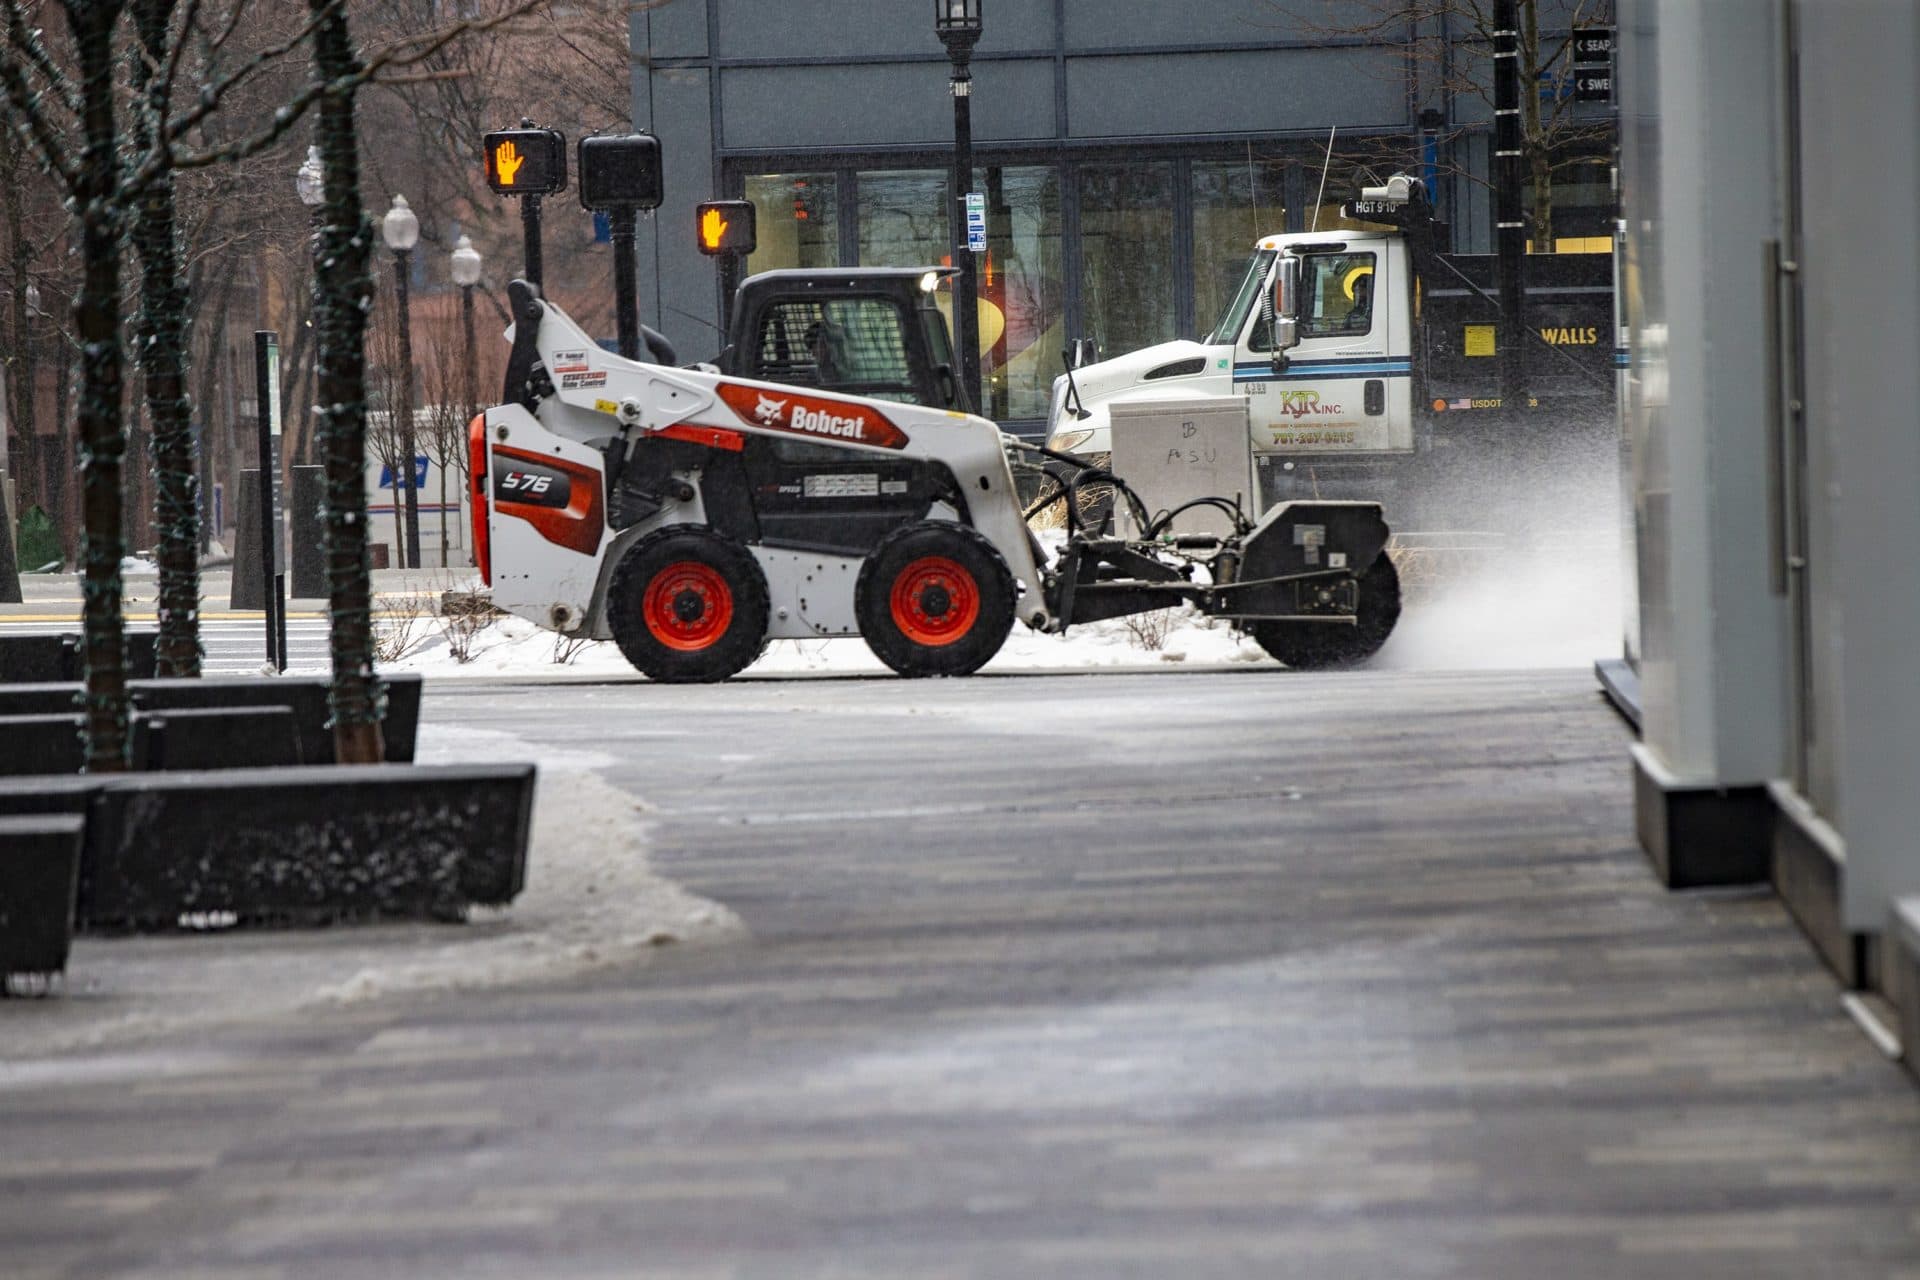 A worker driving a Bobcat, outfitted with a power broom, cleans up the sidewalk on Seaport Boulevard. (Jesse Costa/WBUR)